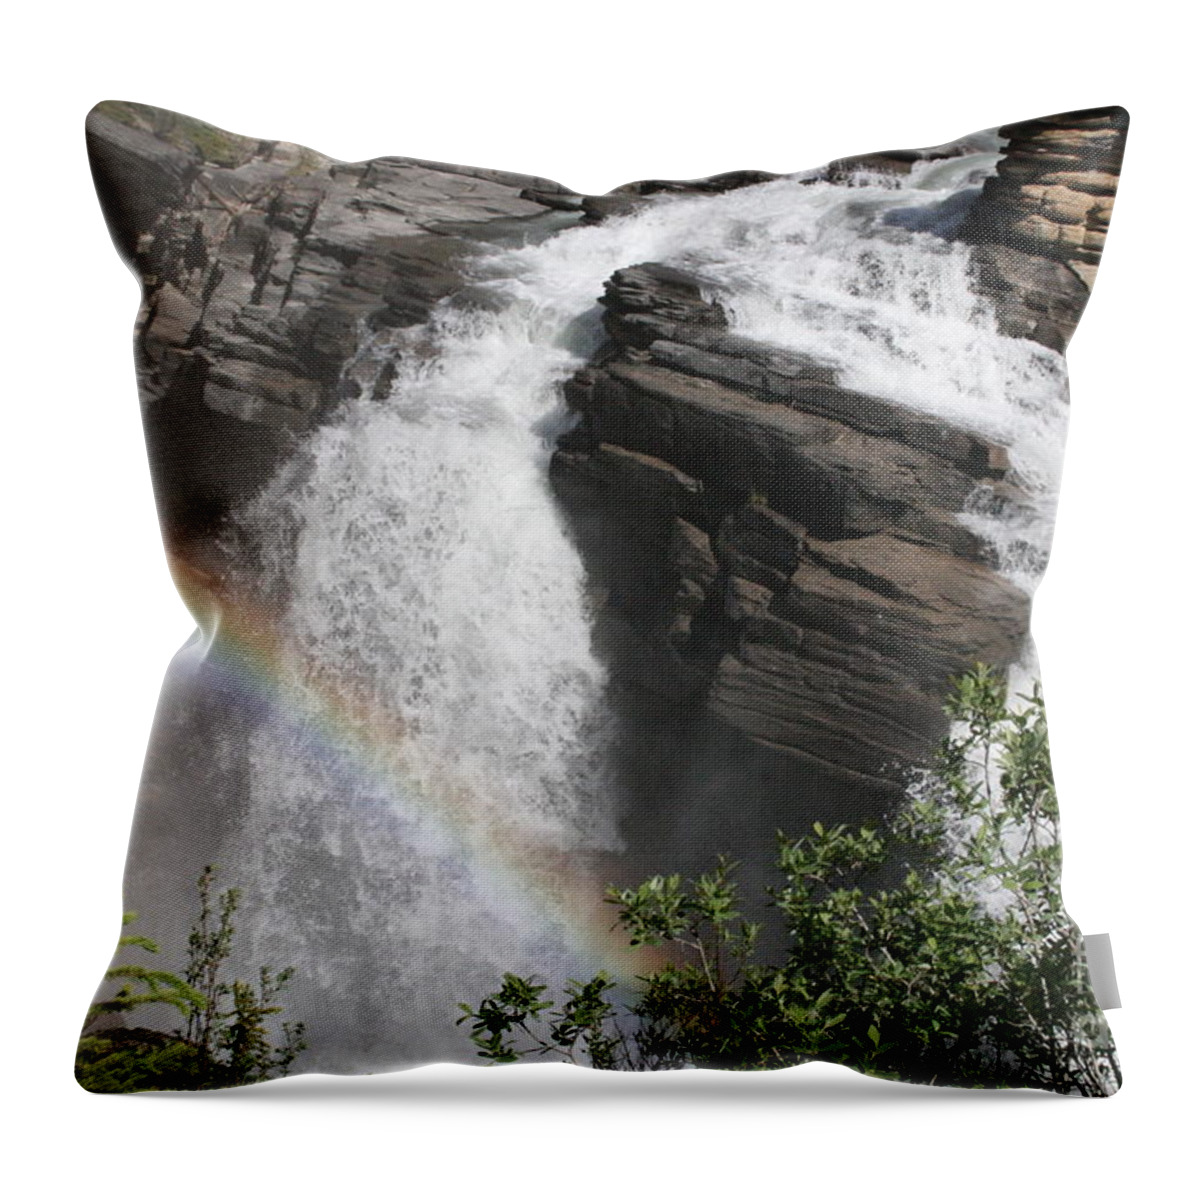 Rainbow Throw Pillow featuring the photograph Rainbow Over Falls by Mary Mikawoz